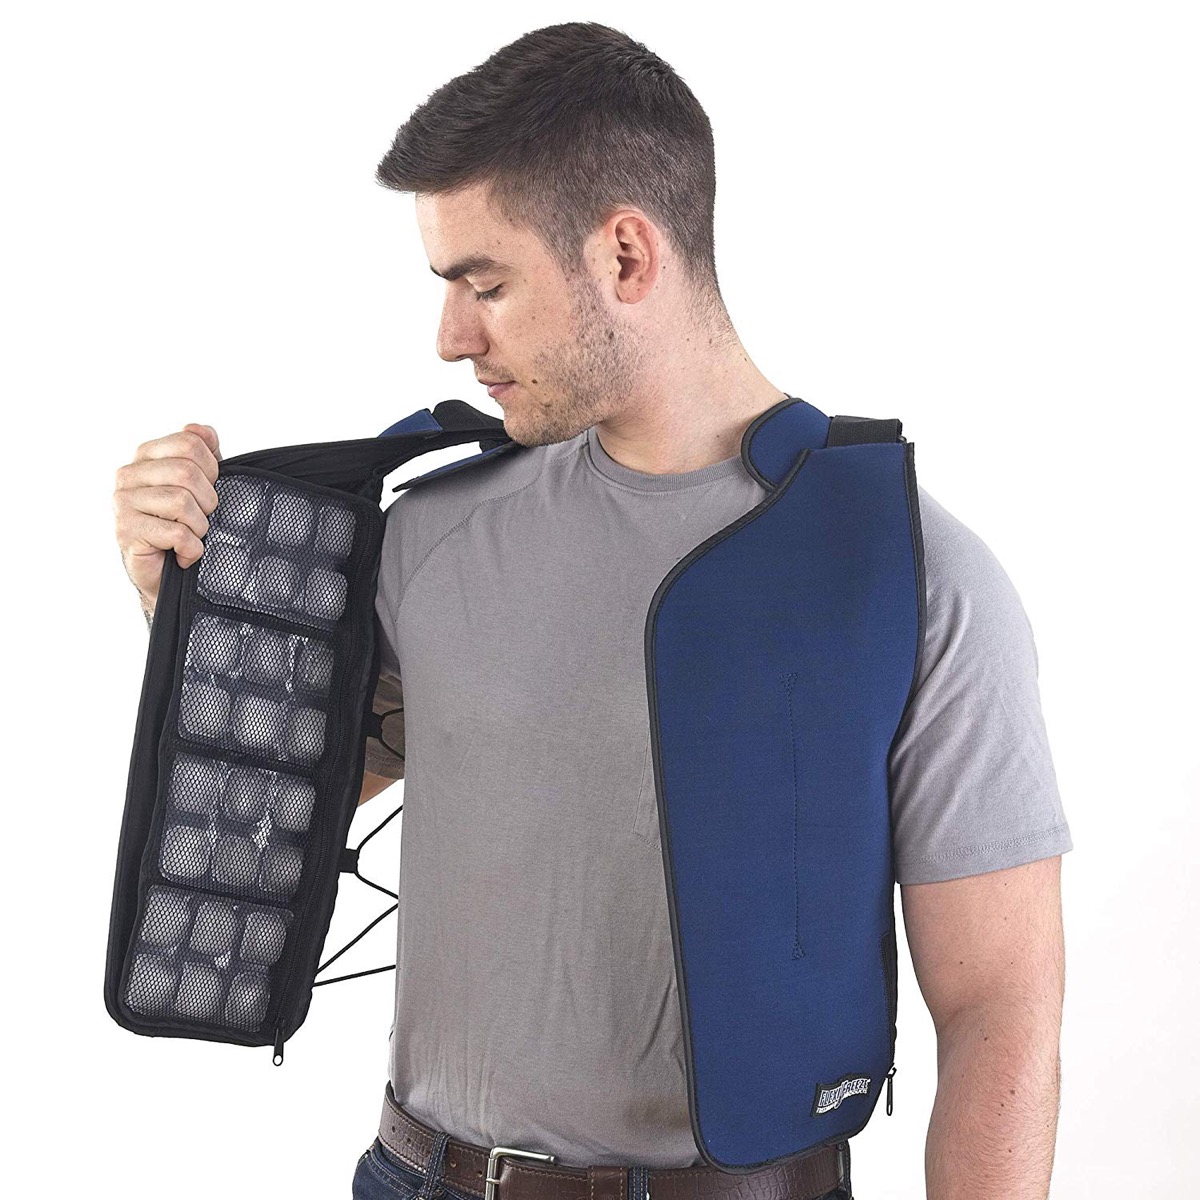 vest with ice cubes in it, cooling products